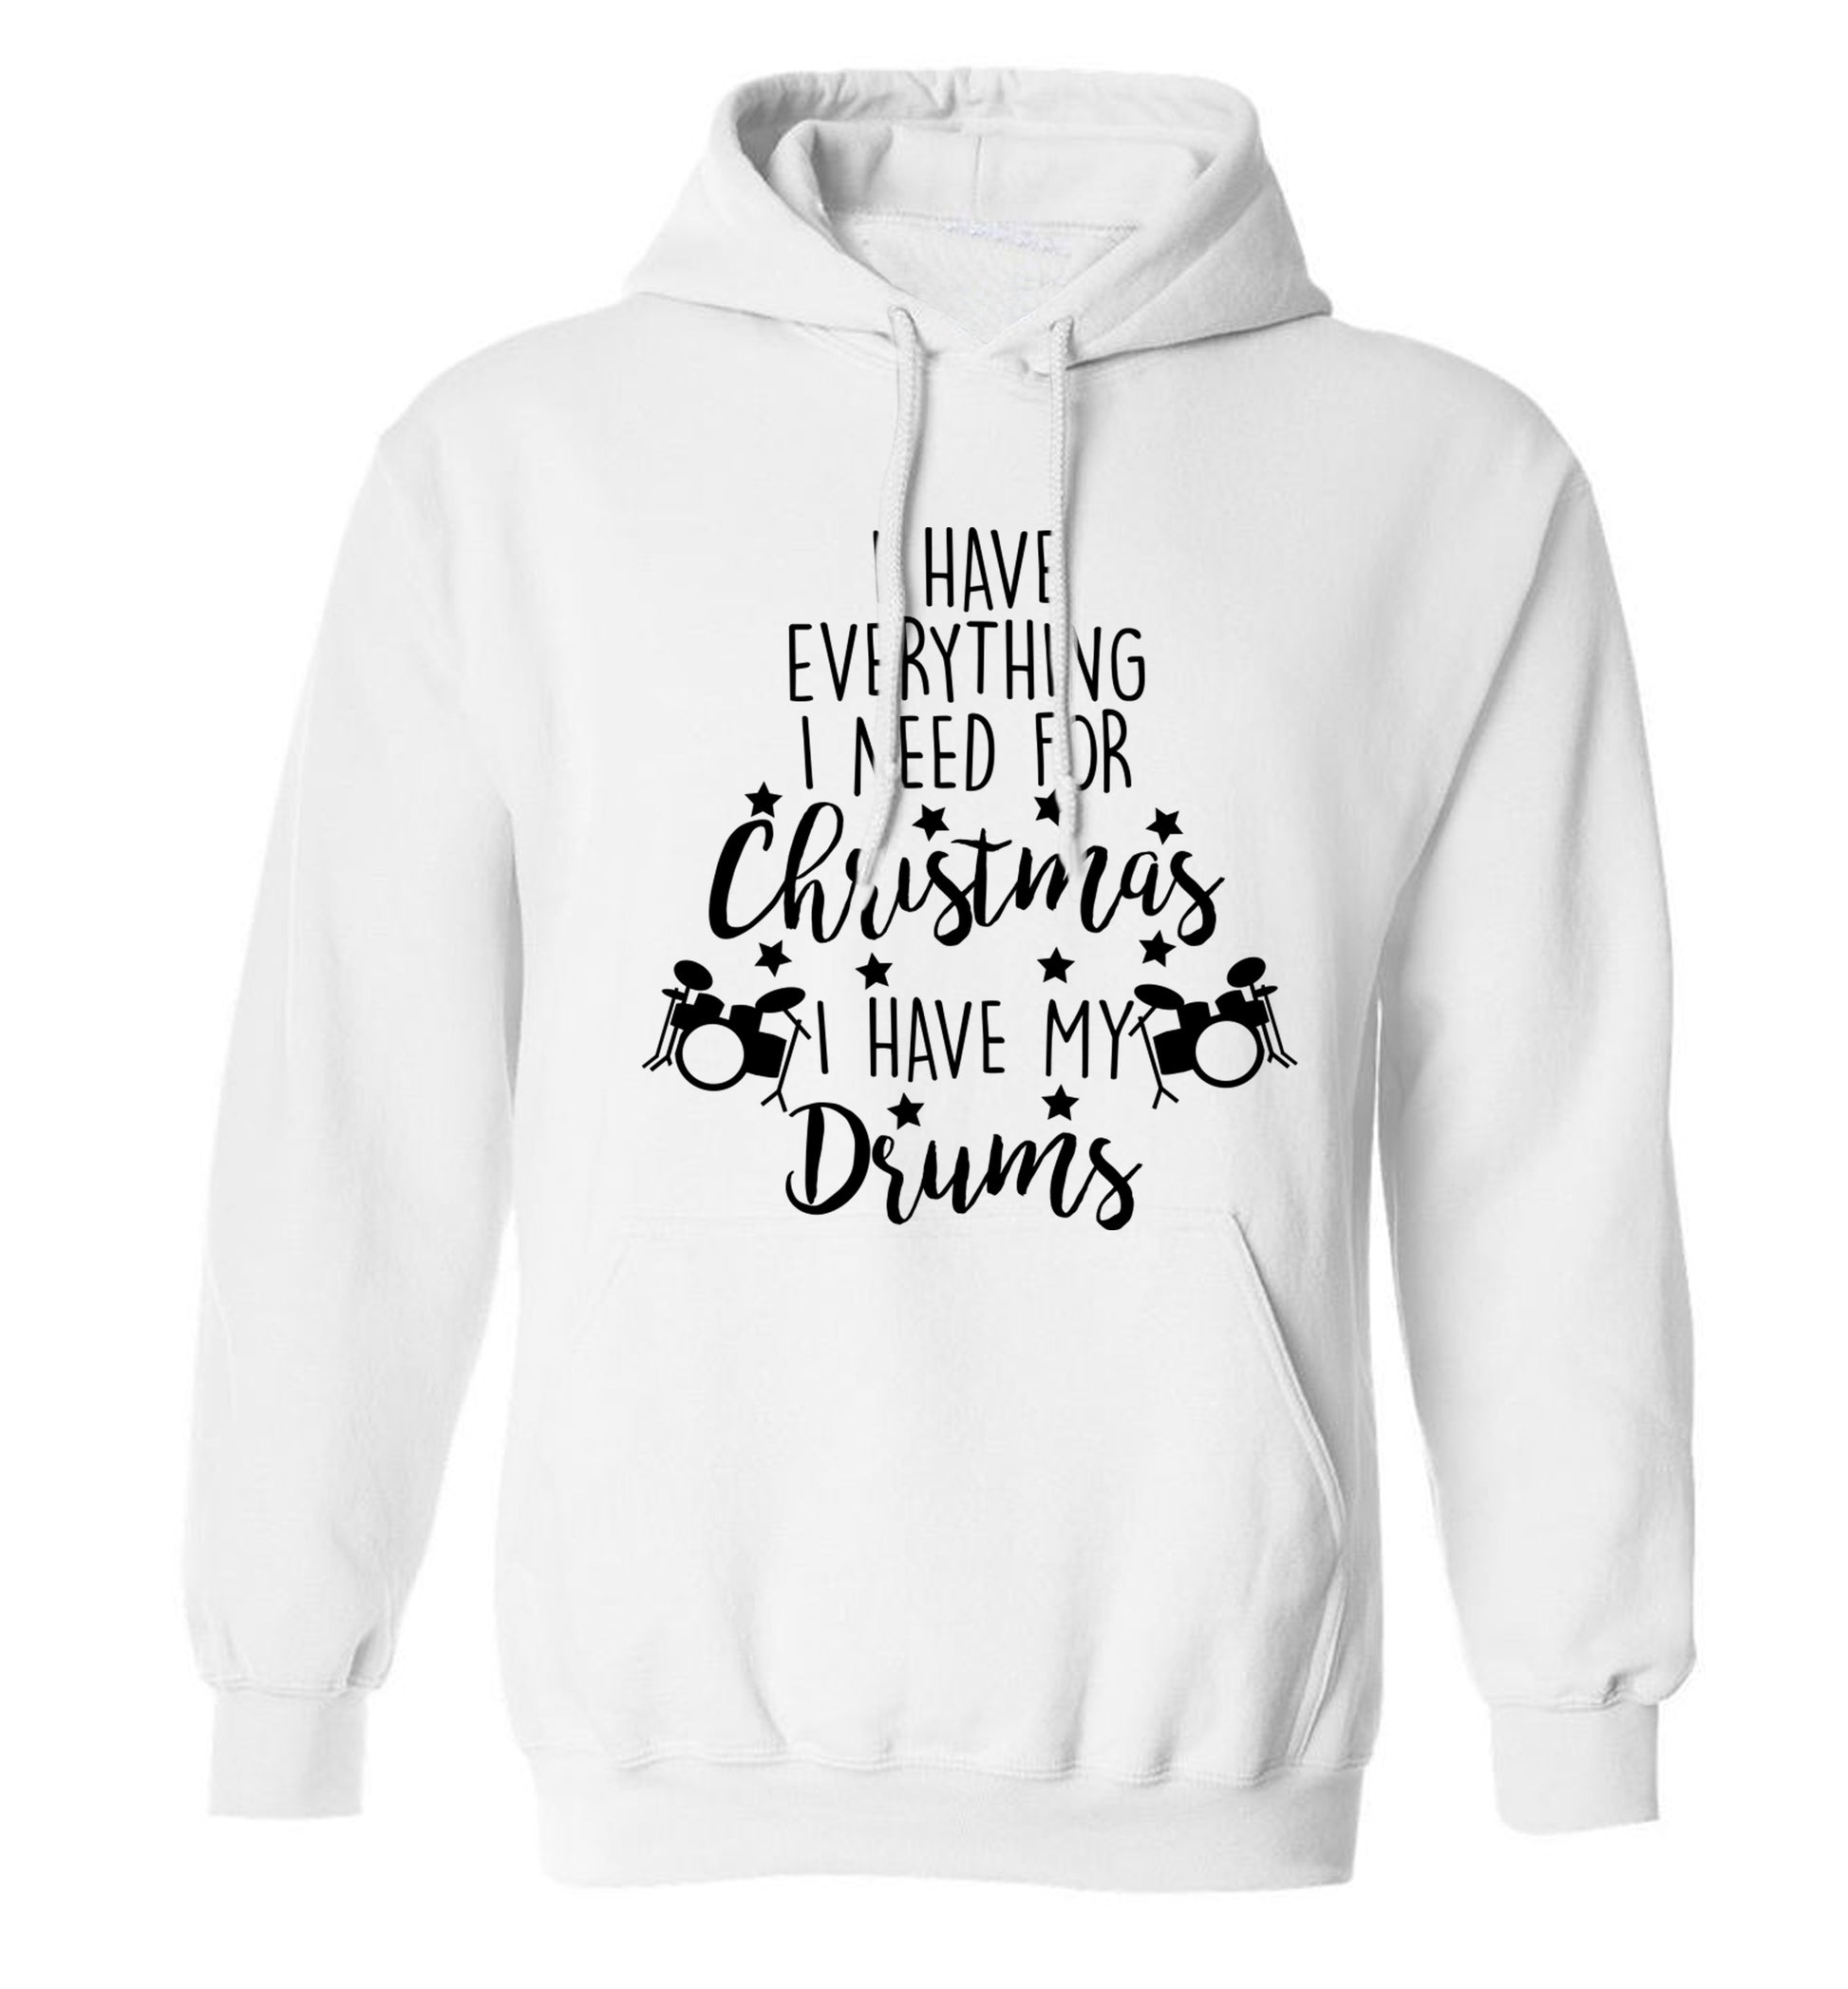 I have everything I need for Christmas I have my drums! adults unisex white hoodie 2XL